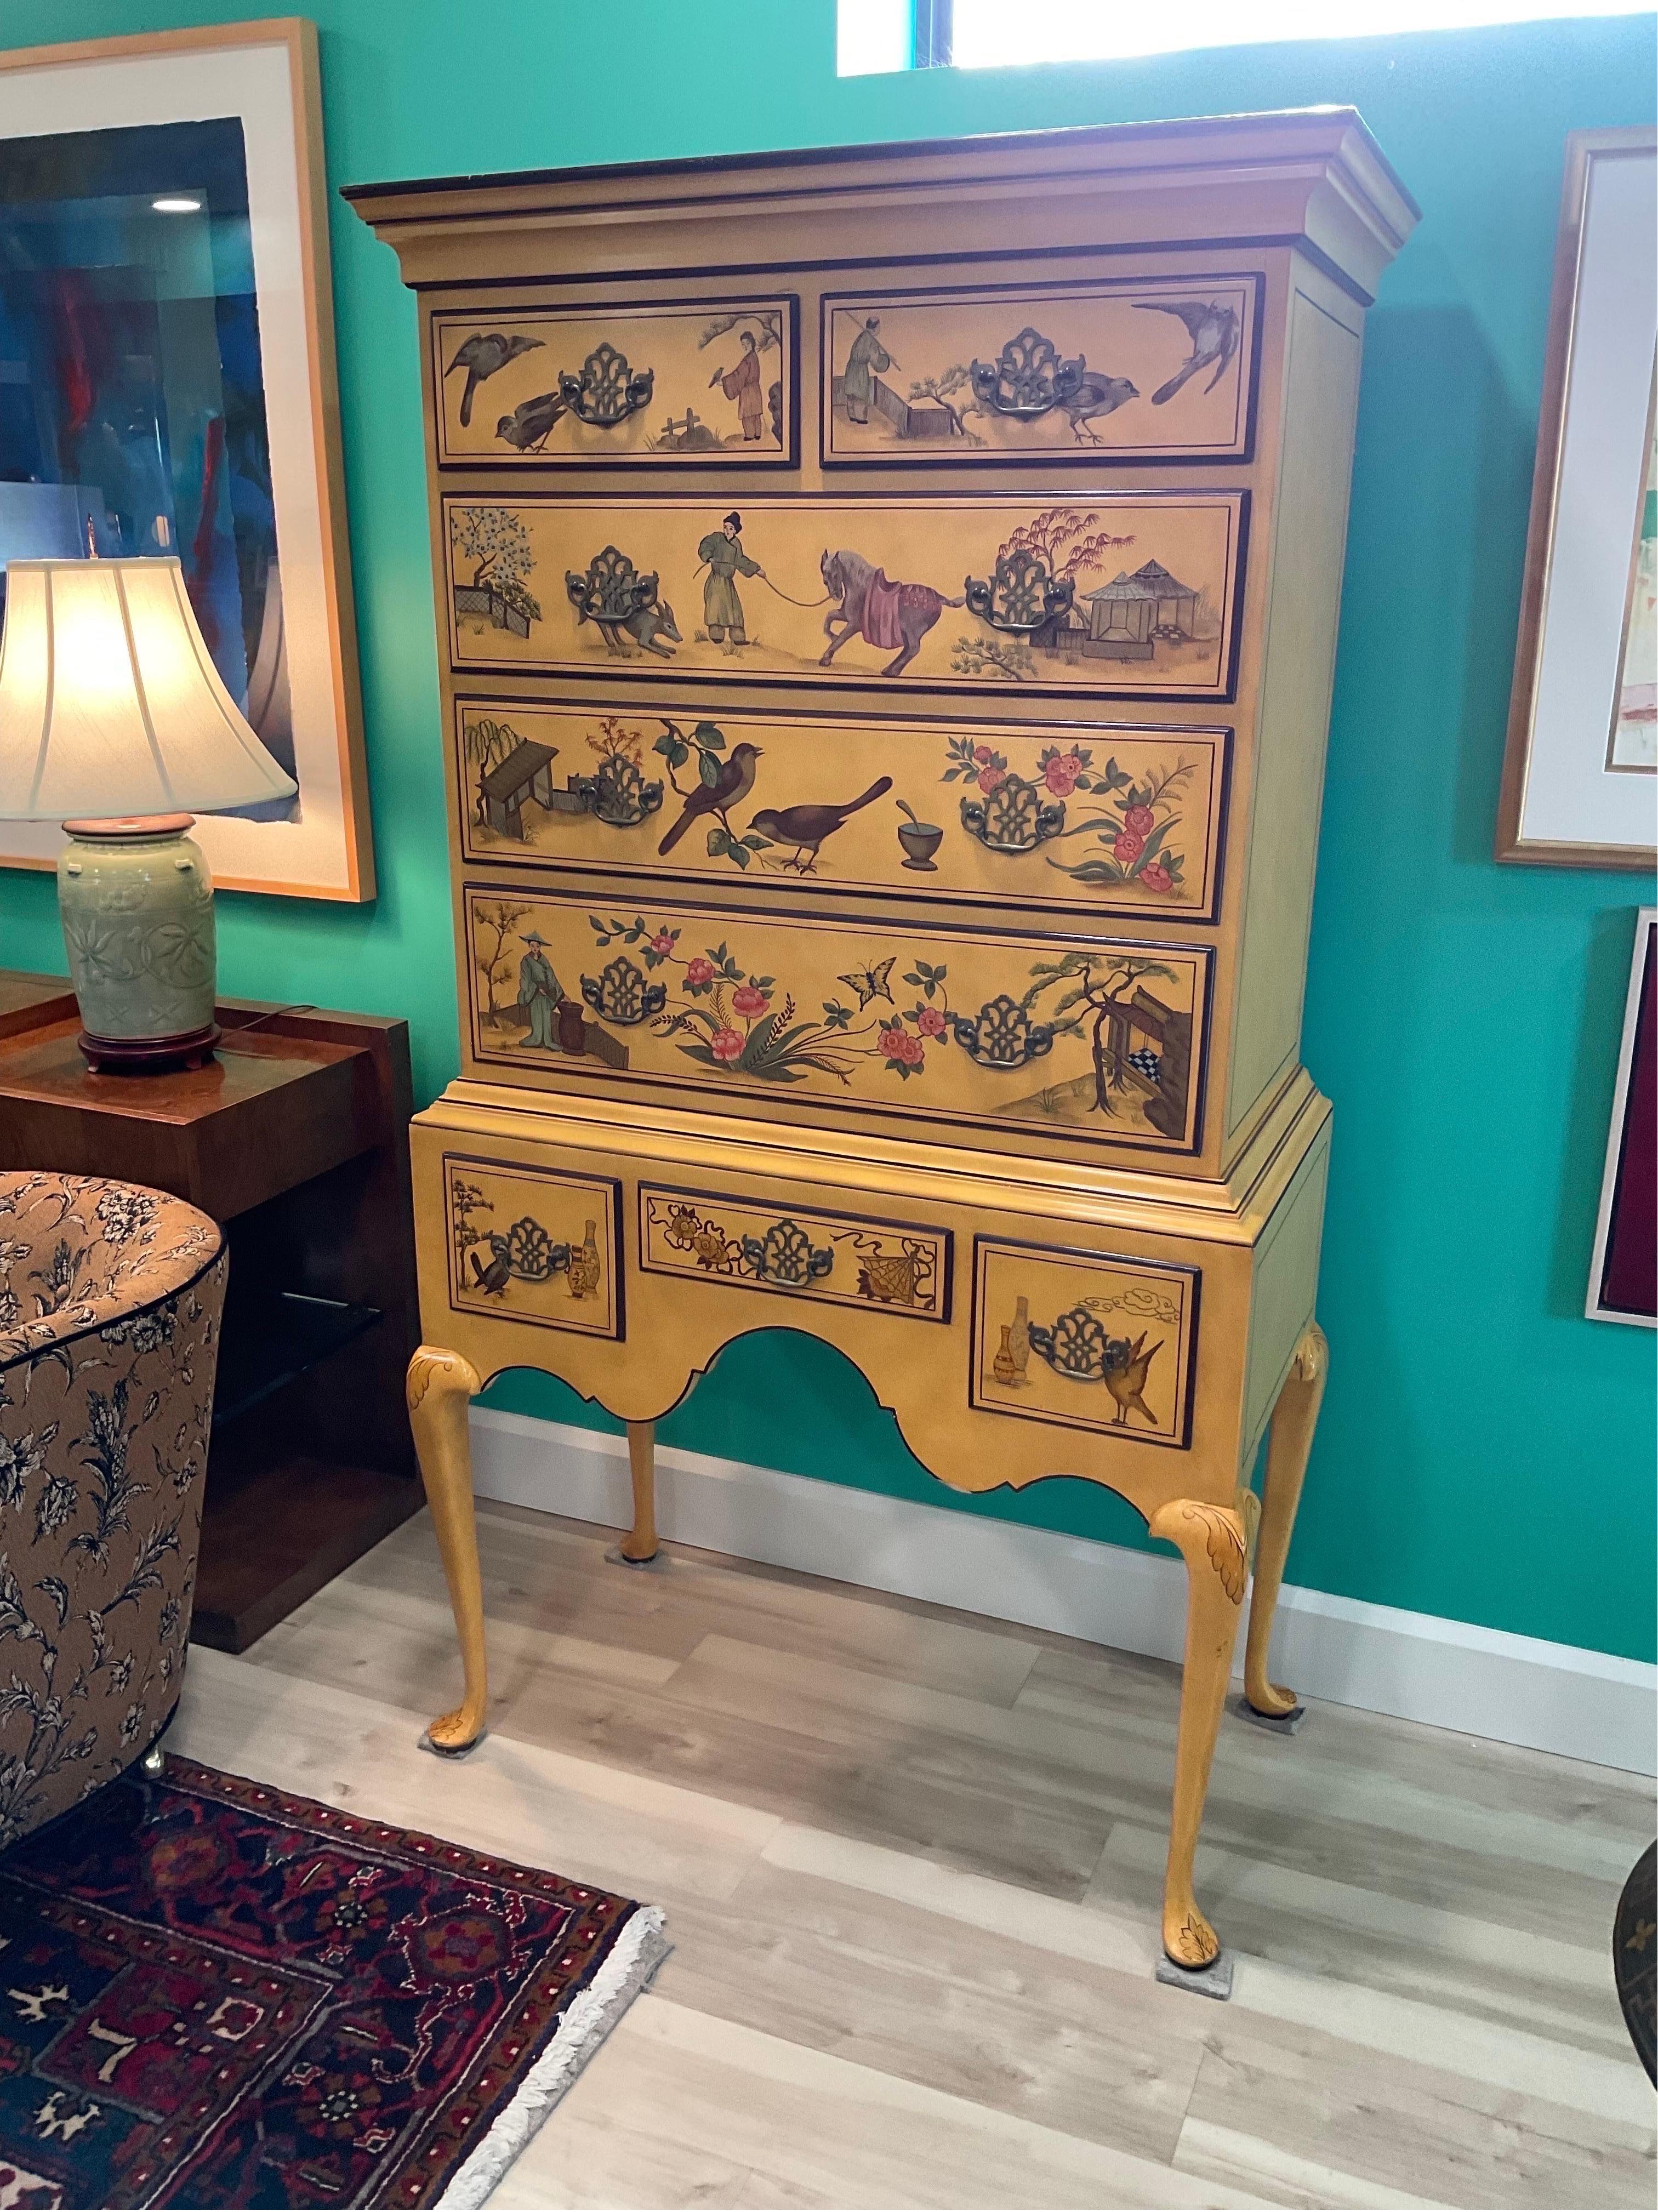 Spectacular and seldom seen Chinoiserie Highboy from a small Collection Baker which was featured in this extraordinary Yellow Base with hand painted scenes. 

Condition Disclosure:
Please understand nearly all of our inventory is comprised of rare